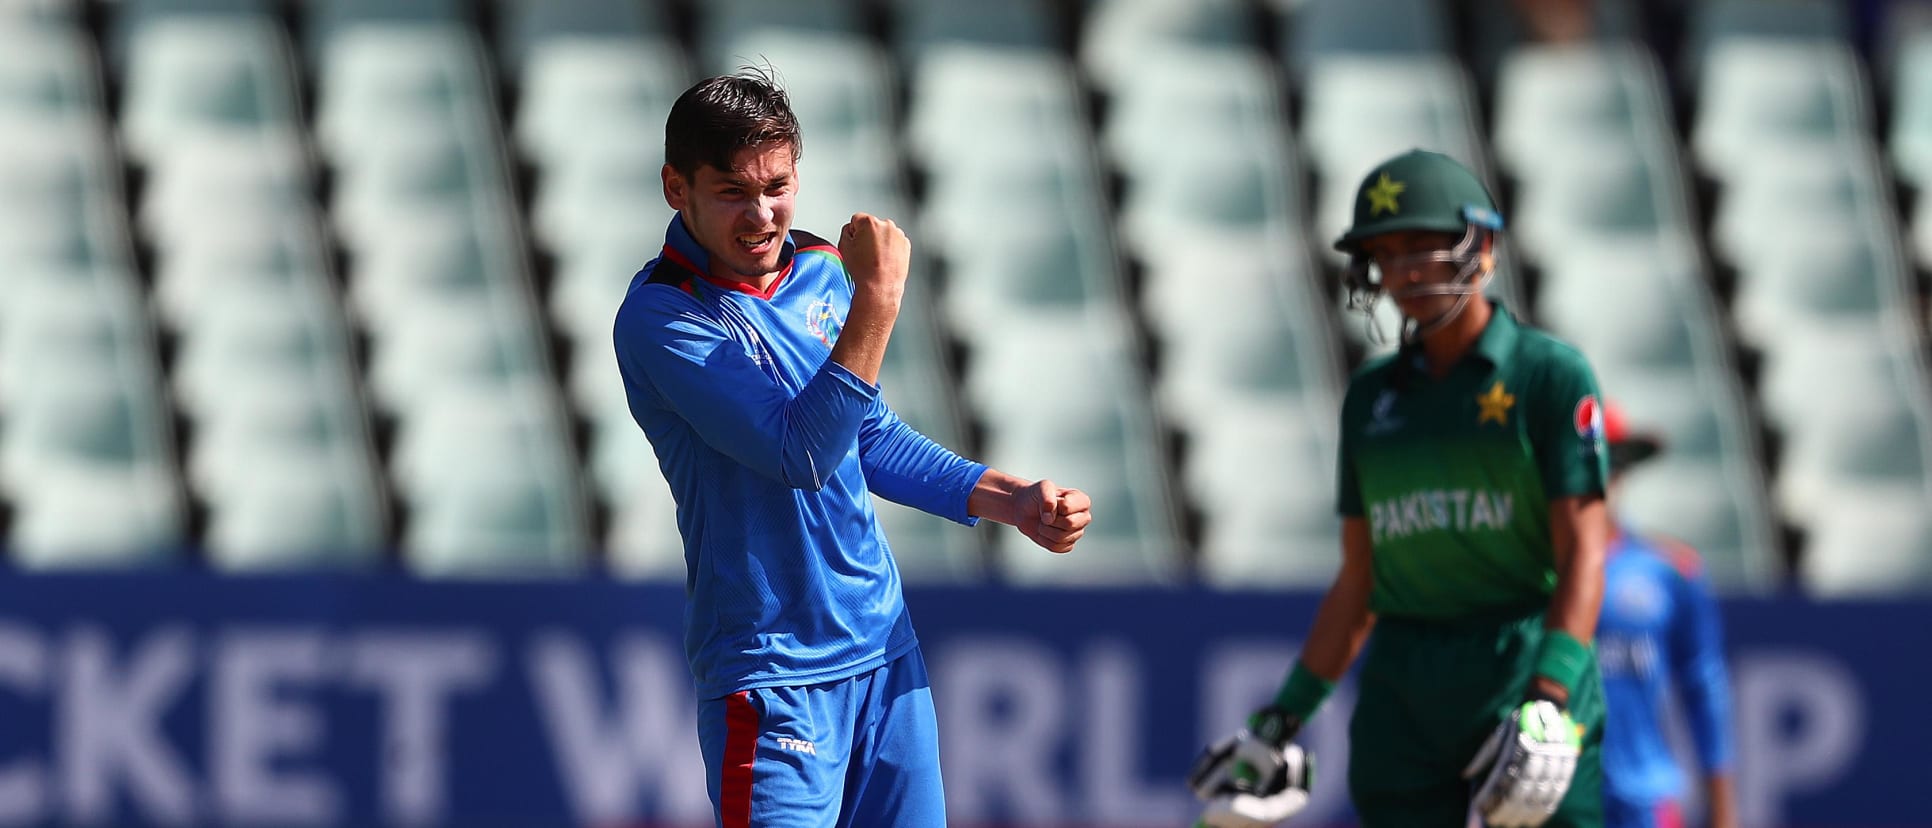 Noor Ahmad celebrates after picking up a wicket against Pakistan in the 2020 U19 ICC Men's Cricket World Cup